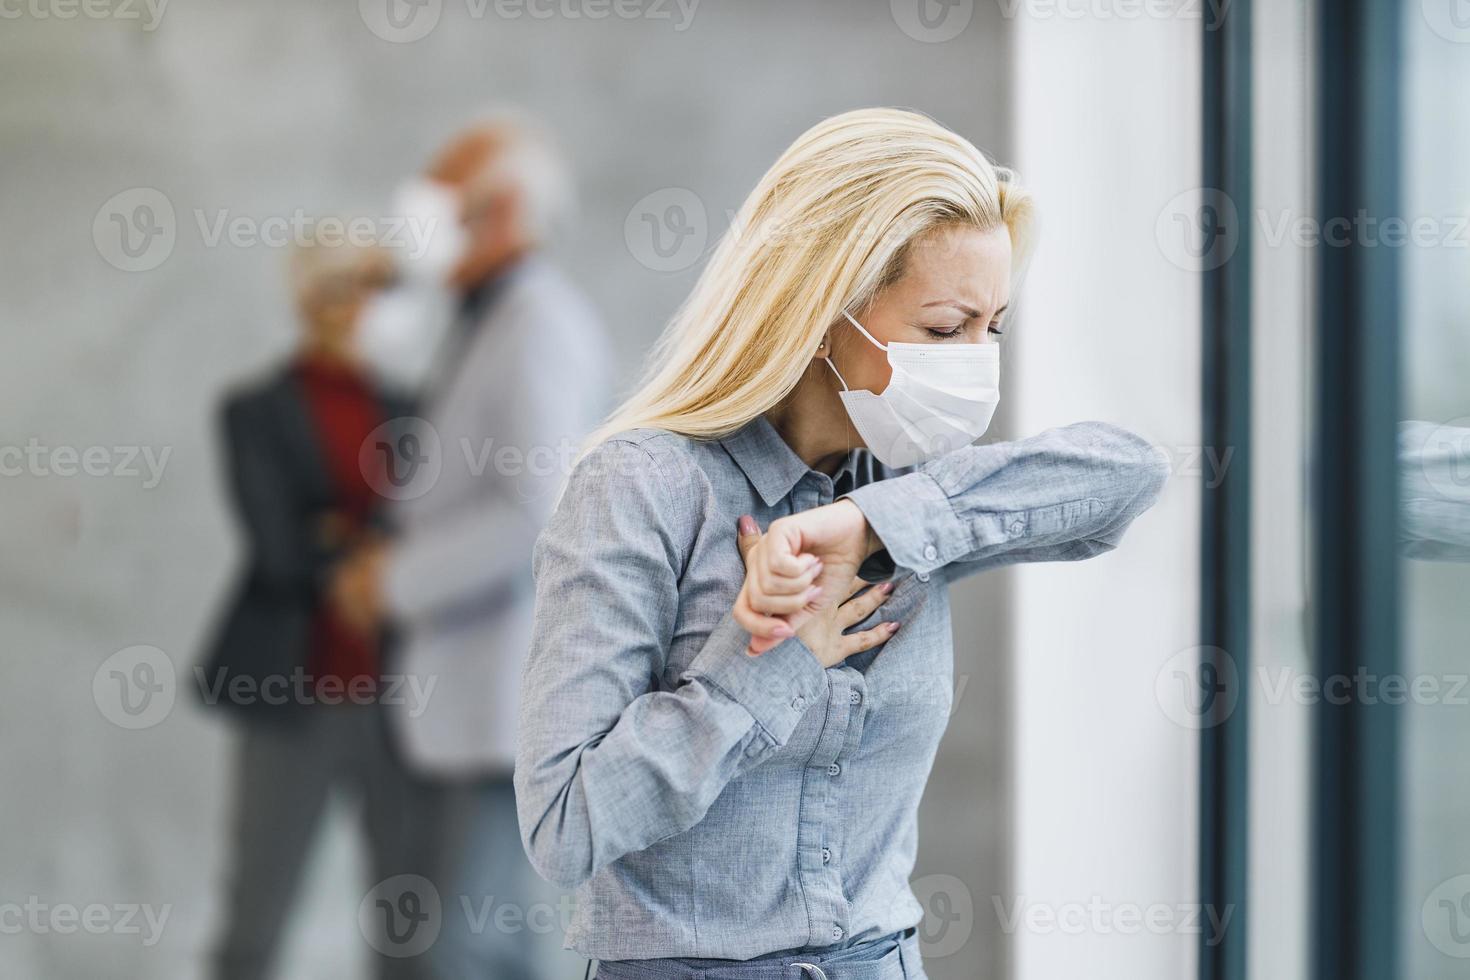 A Business Woman With Protective Mask Coughs At The Elbow During COVID-19 Pandemic photo